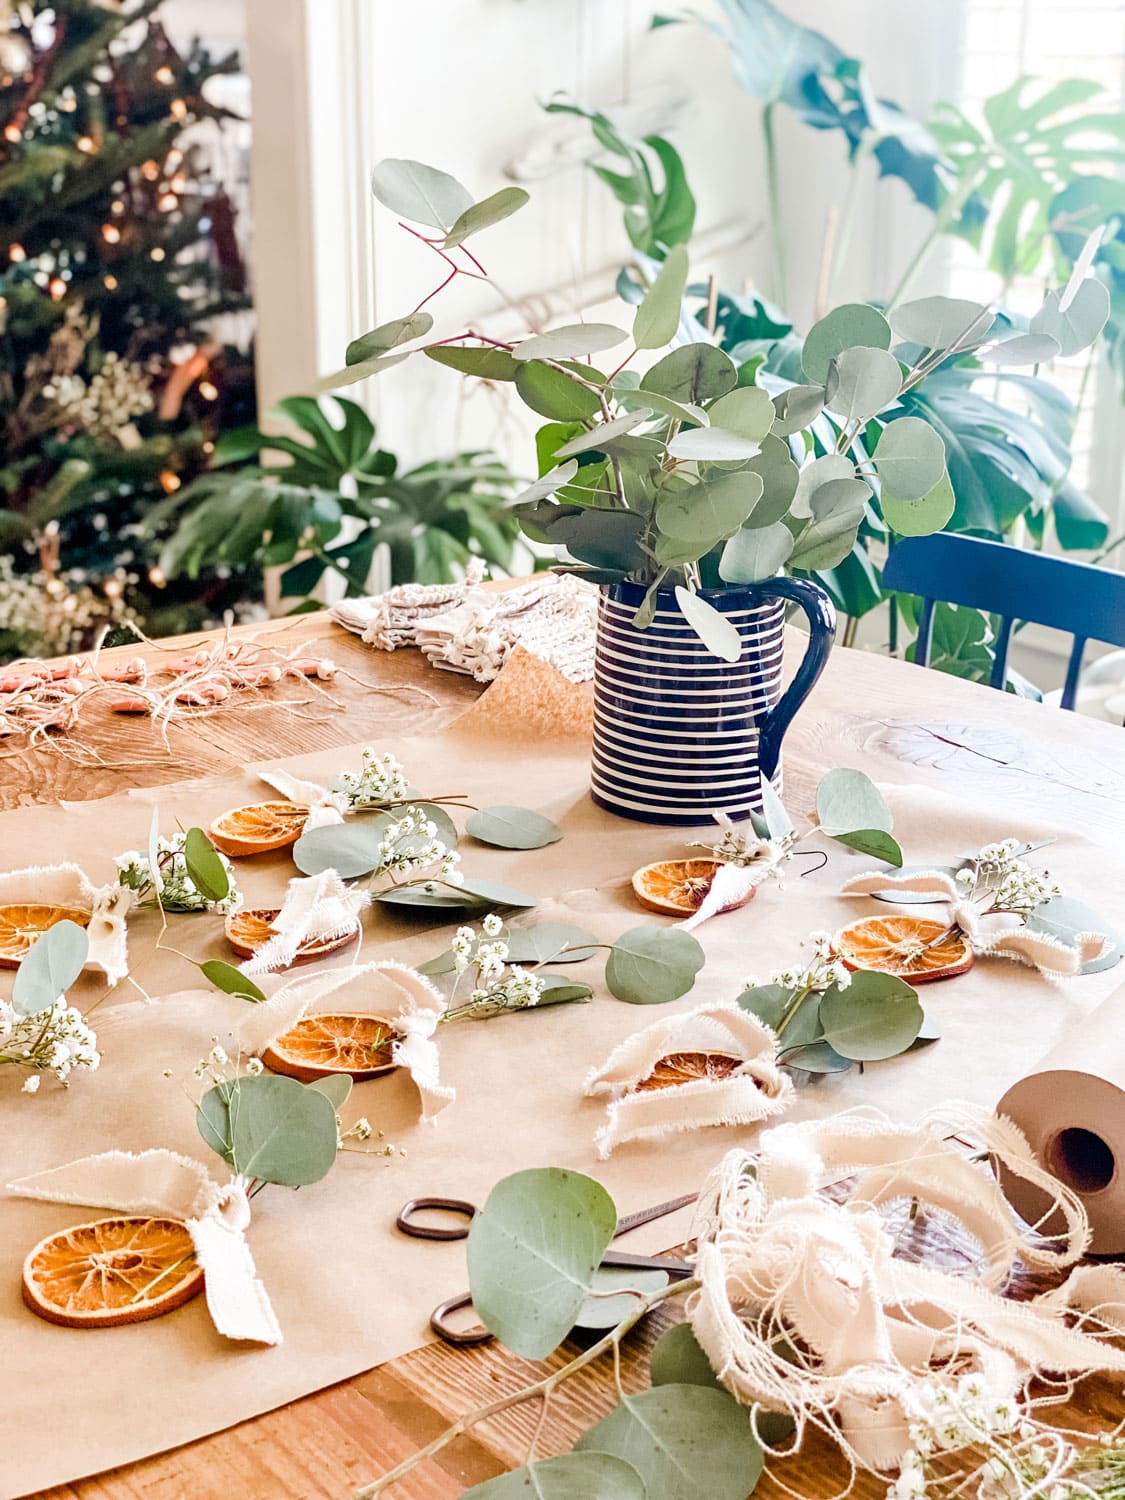 11 Easy DIY Christmas Decorations You Can Make Right At Home